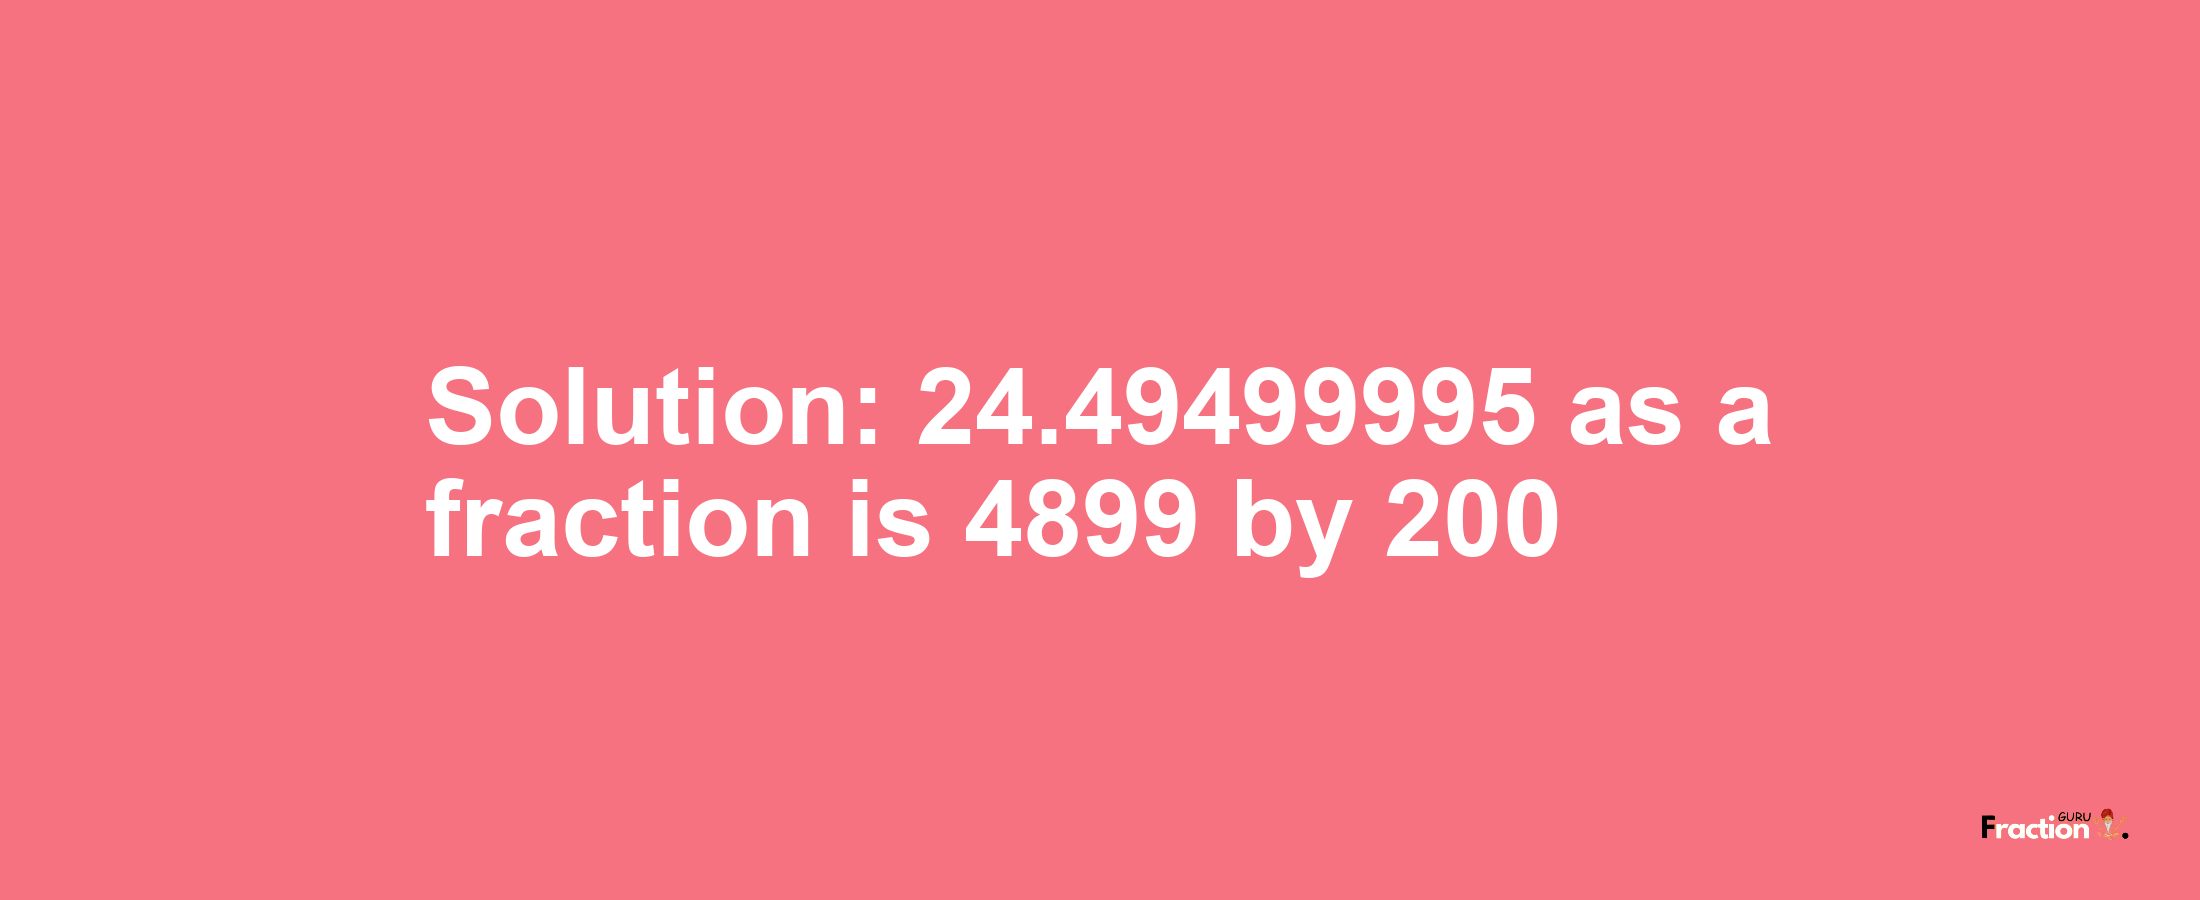 Solution:24.49499995 as a fraction is 4899/200